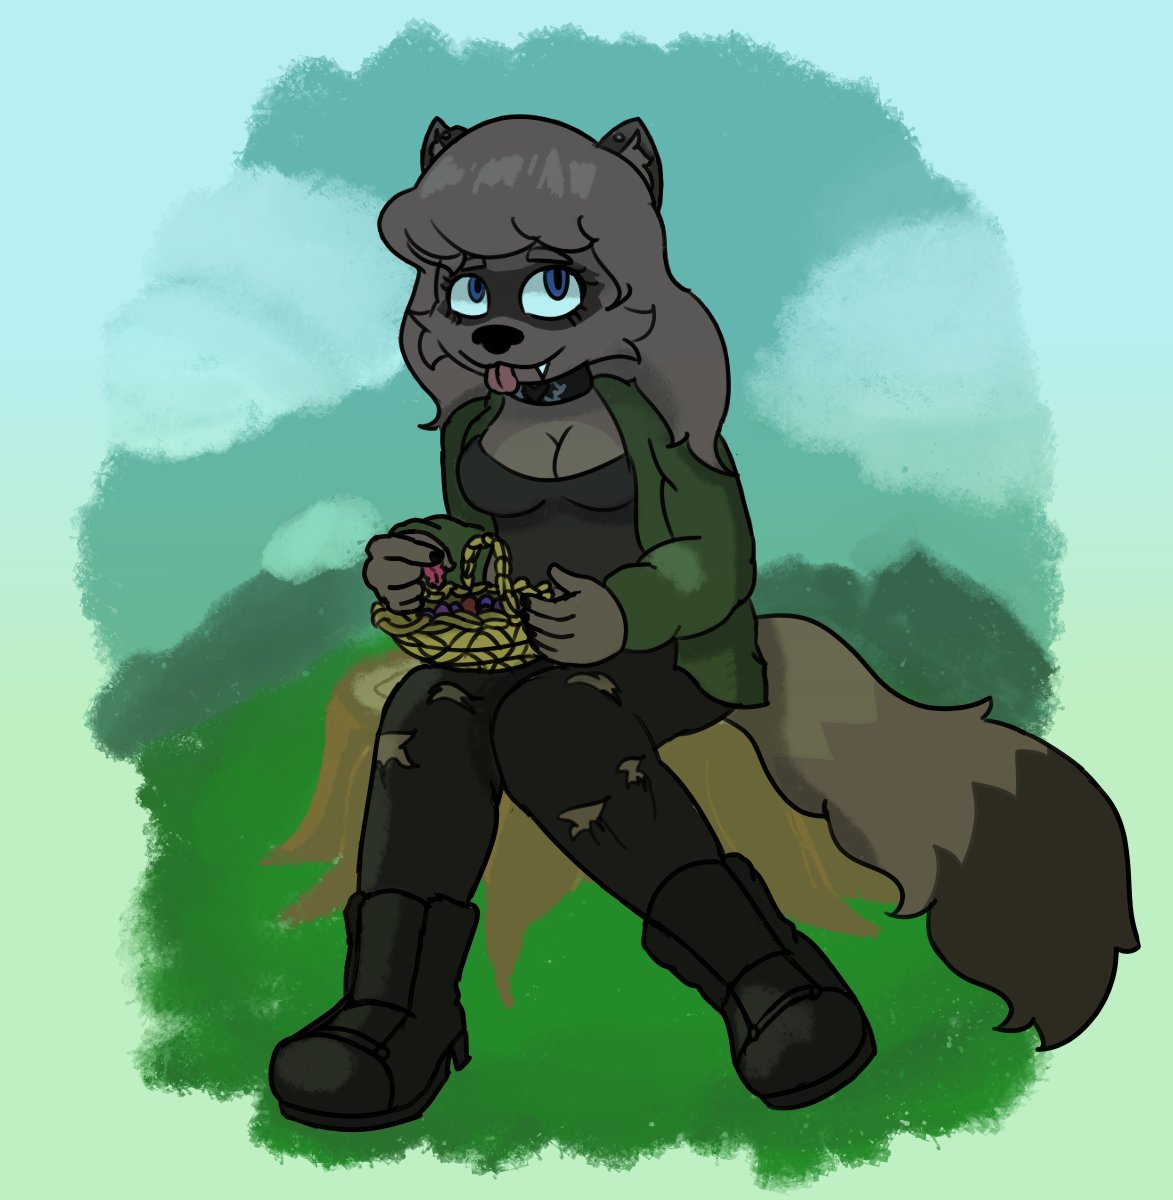 Look at this lil' tall berrypicking raccoon girl